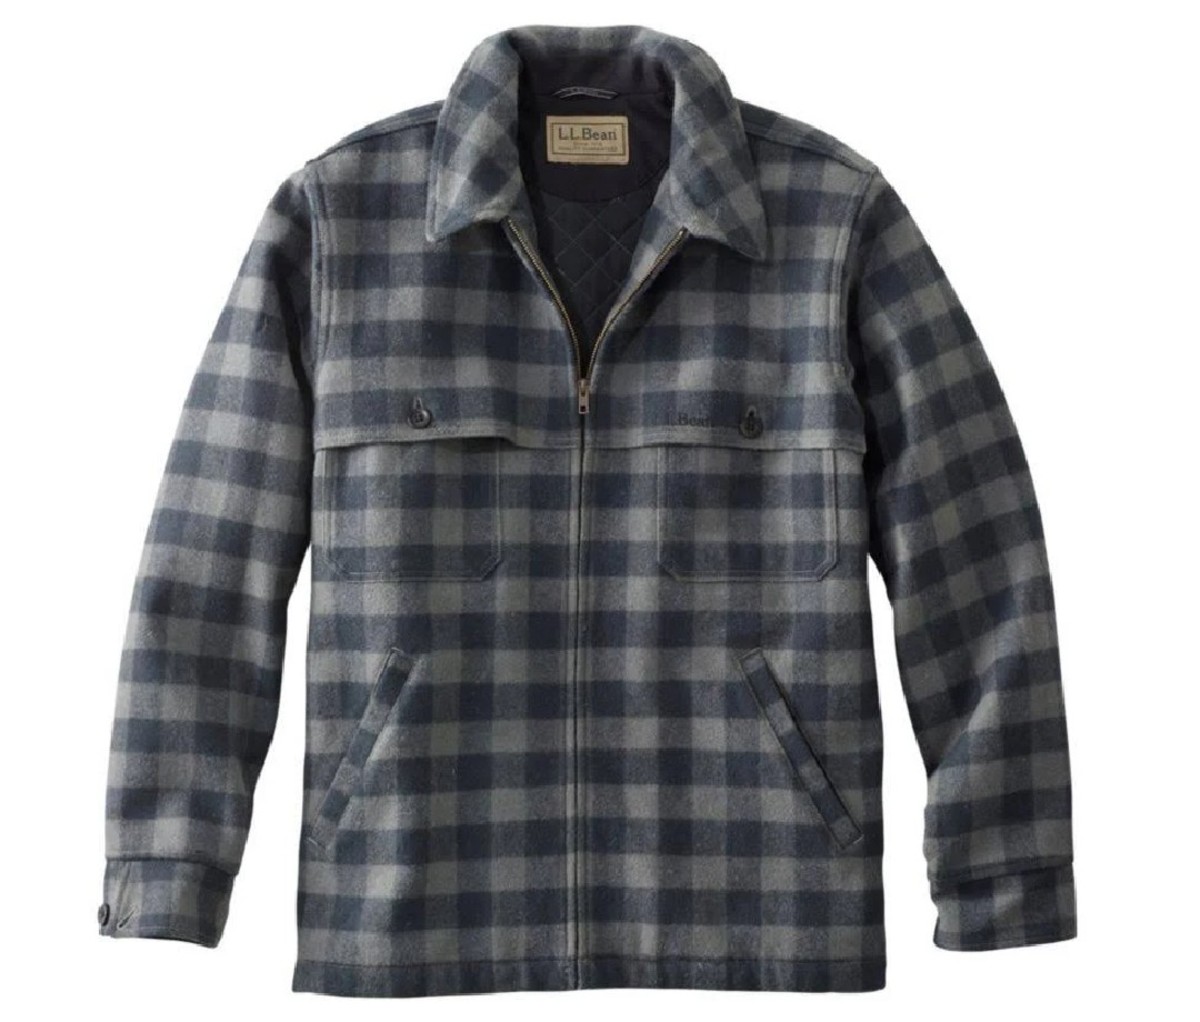 Blue and gray checkered LL Bean Men's Maine Guide Zip-Front Jac-Shirt